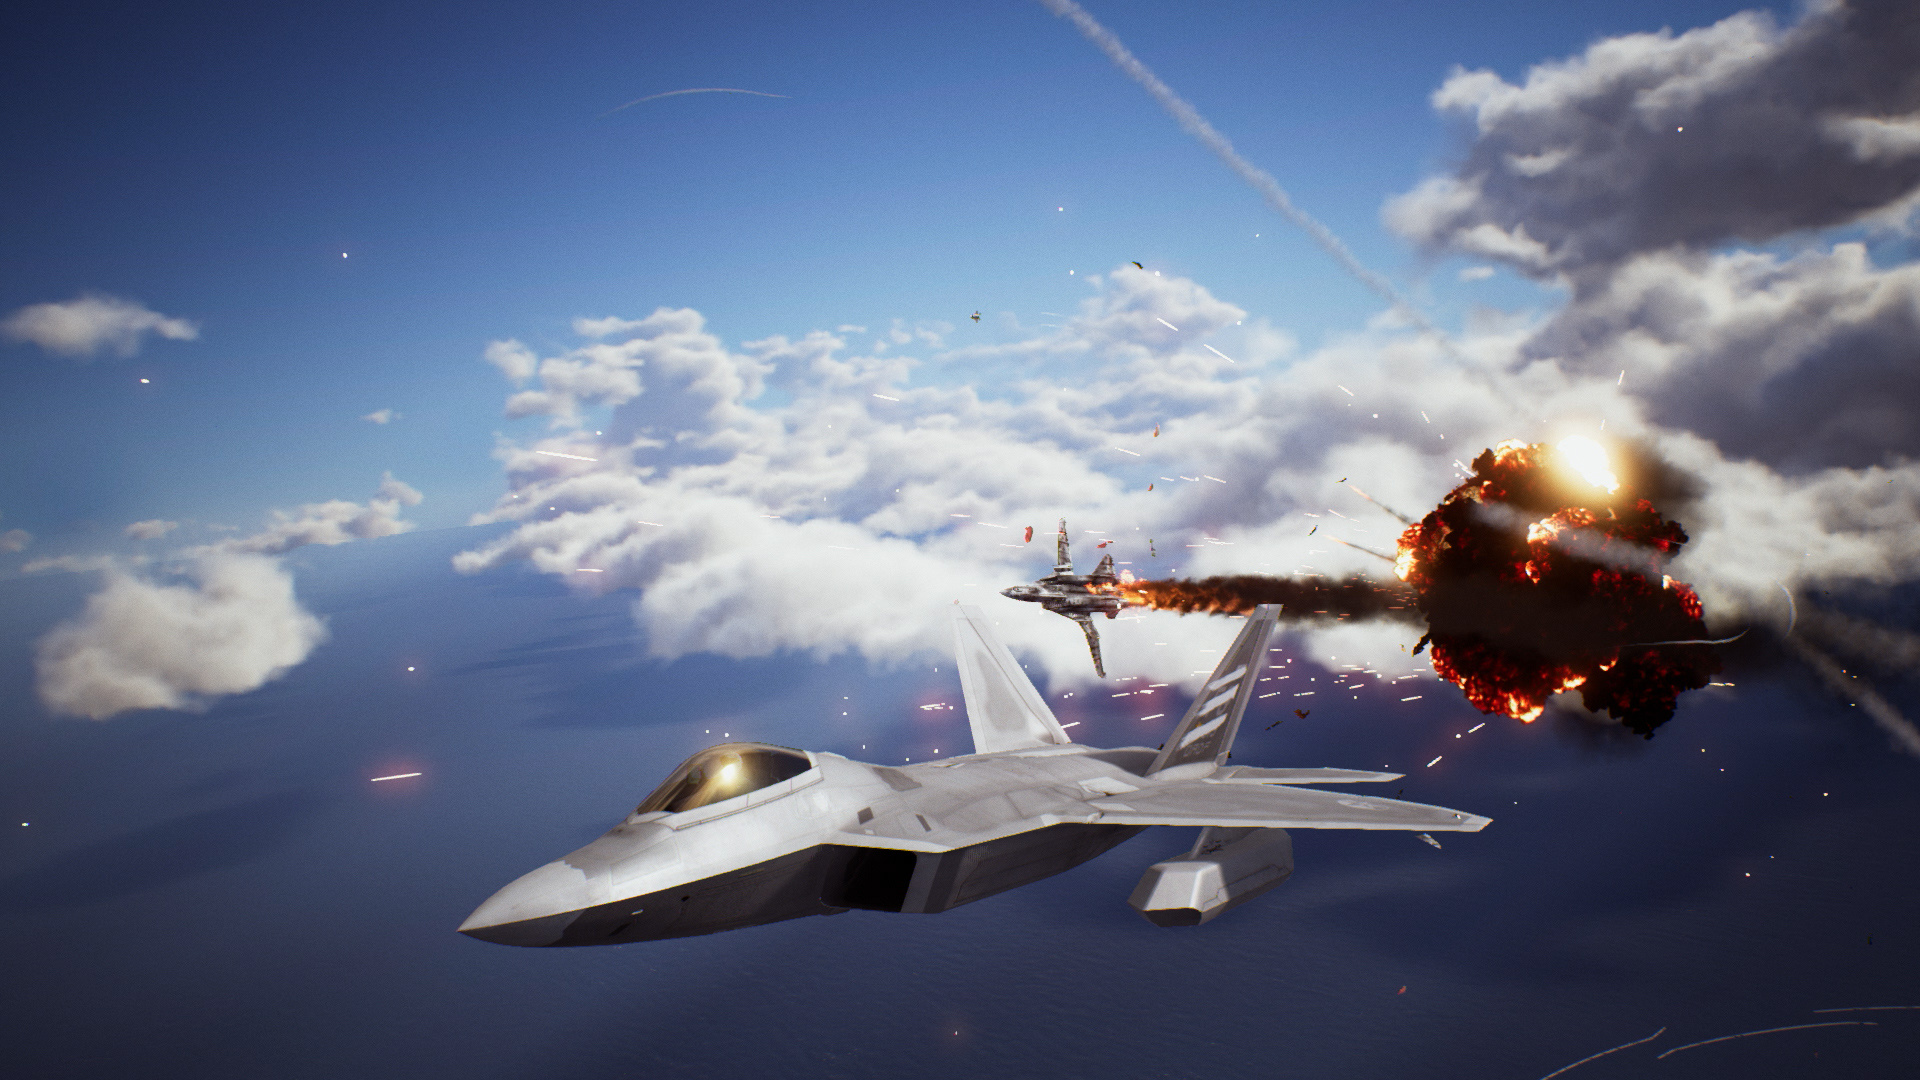 Скриншот *Ace Combat 7: Skies Unknown [PS4 VR] 5.05 / 6.72 / 7.02 [EUR] (2019) [Русский] (v1.00)*